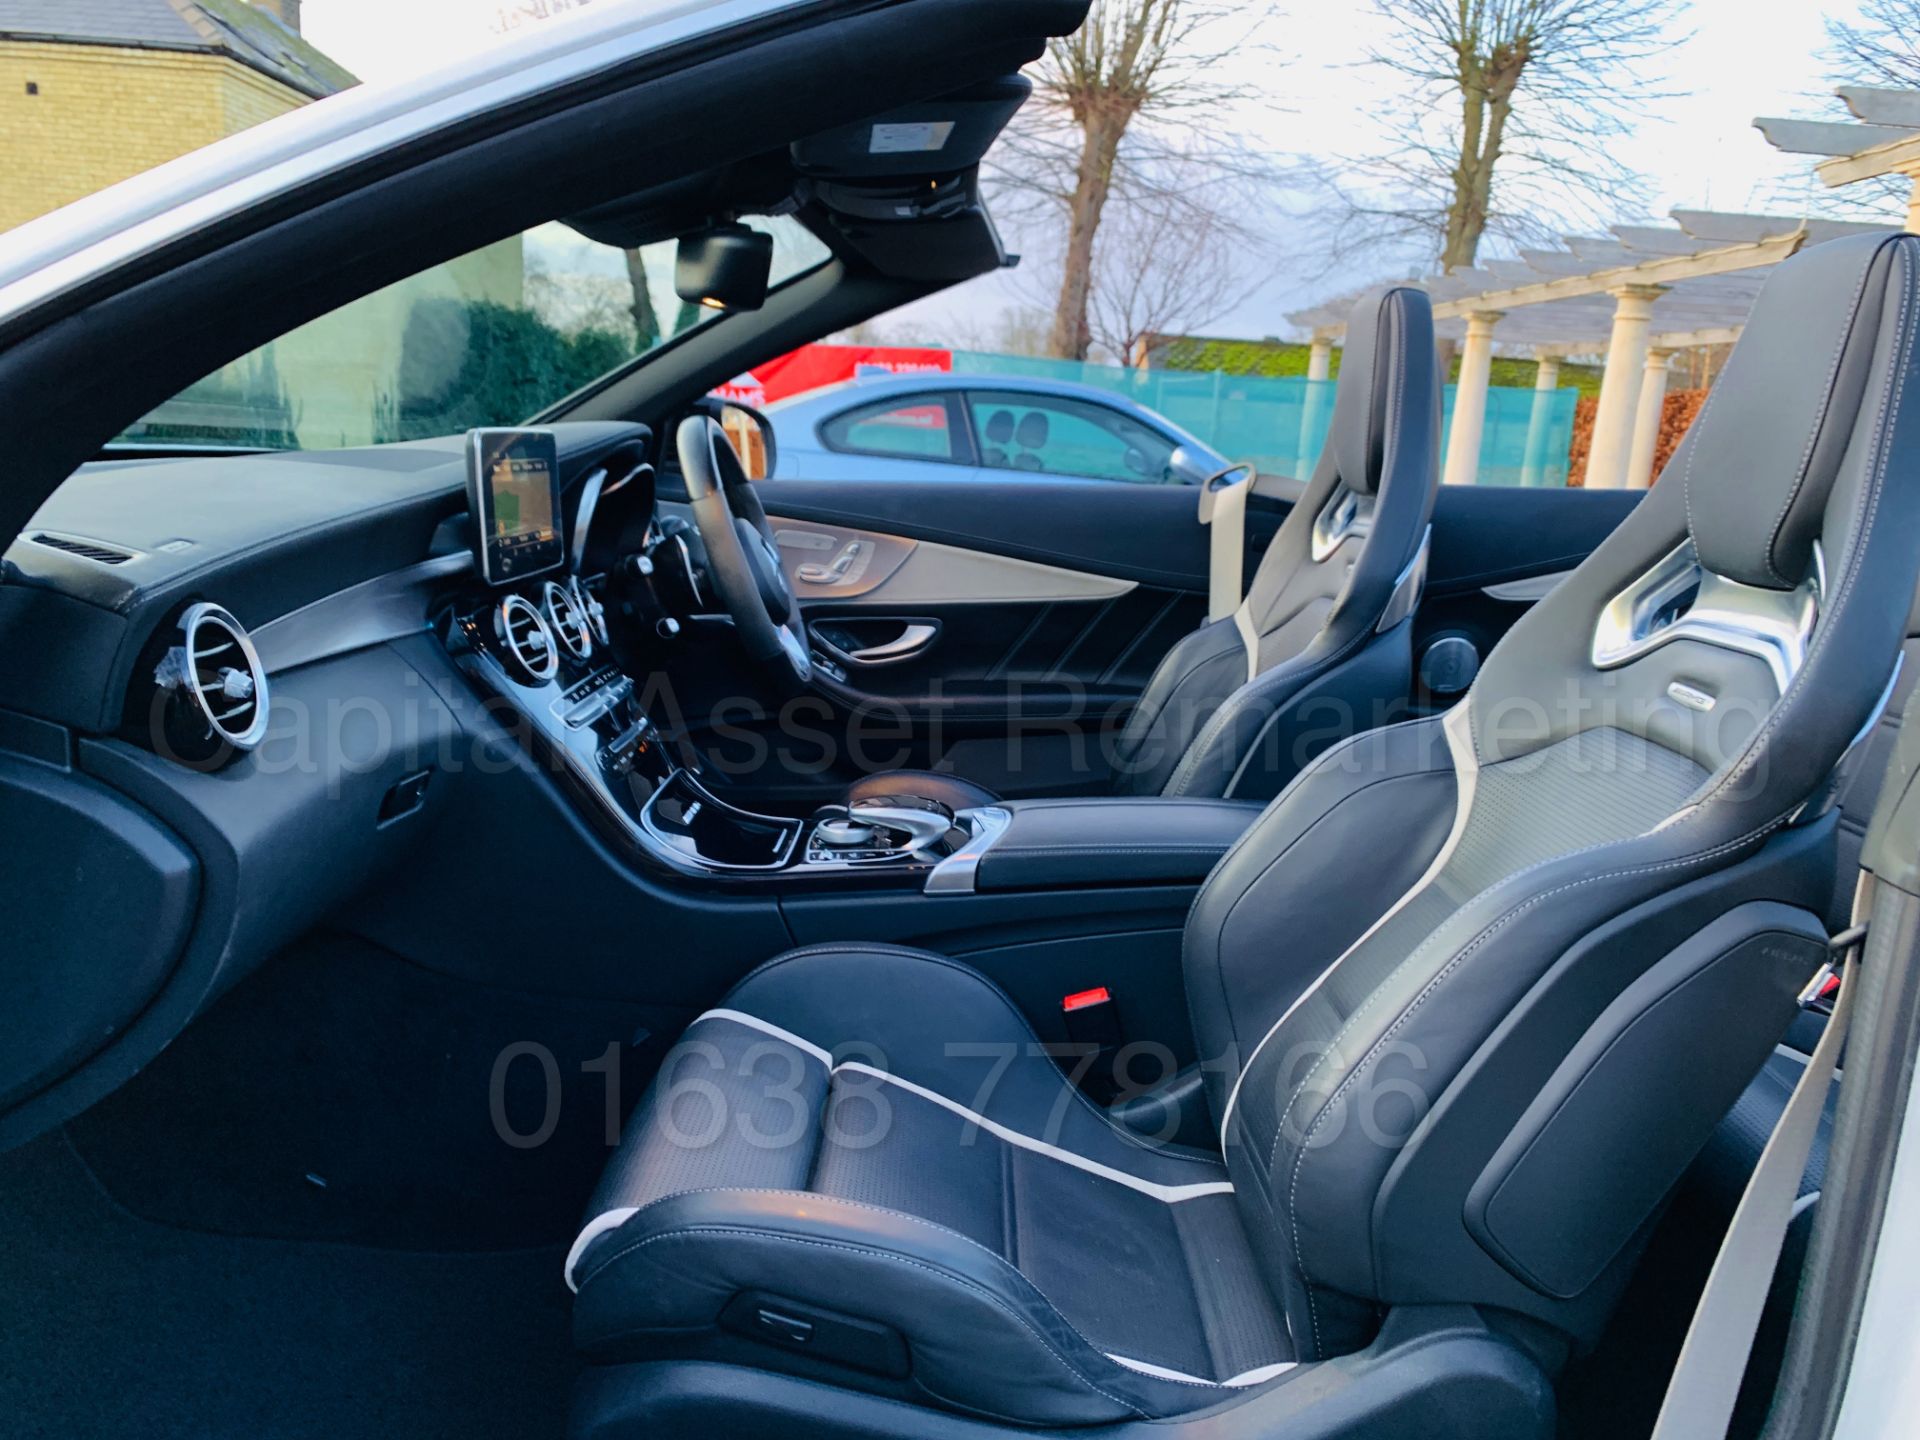 (On Sale) MERCEDES-BENZ AMG C63-S *CABRIOLET* (67 REG) '4.0 BI-TURBO -510 BHP - AUTO' *FULLY LOADED* - Image 46 of 79